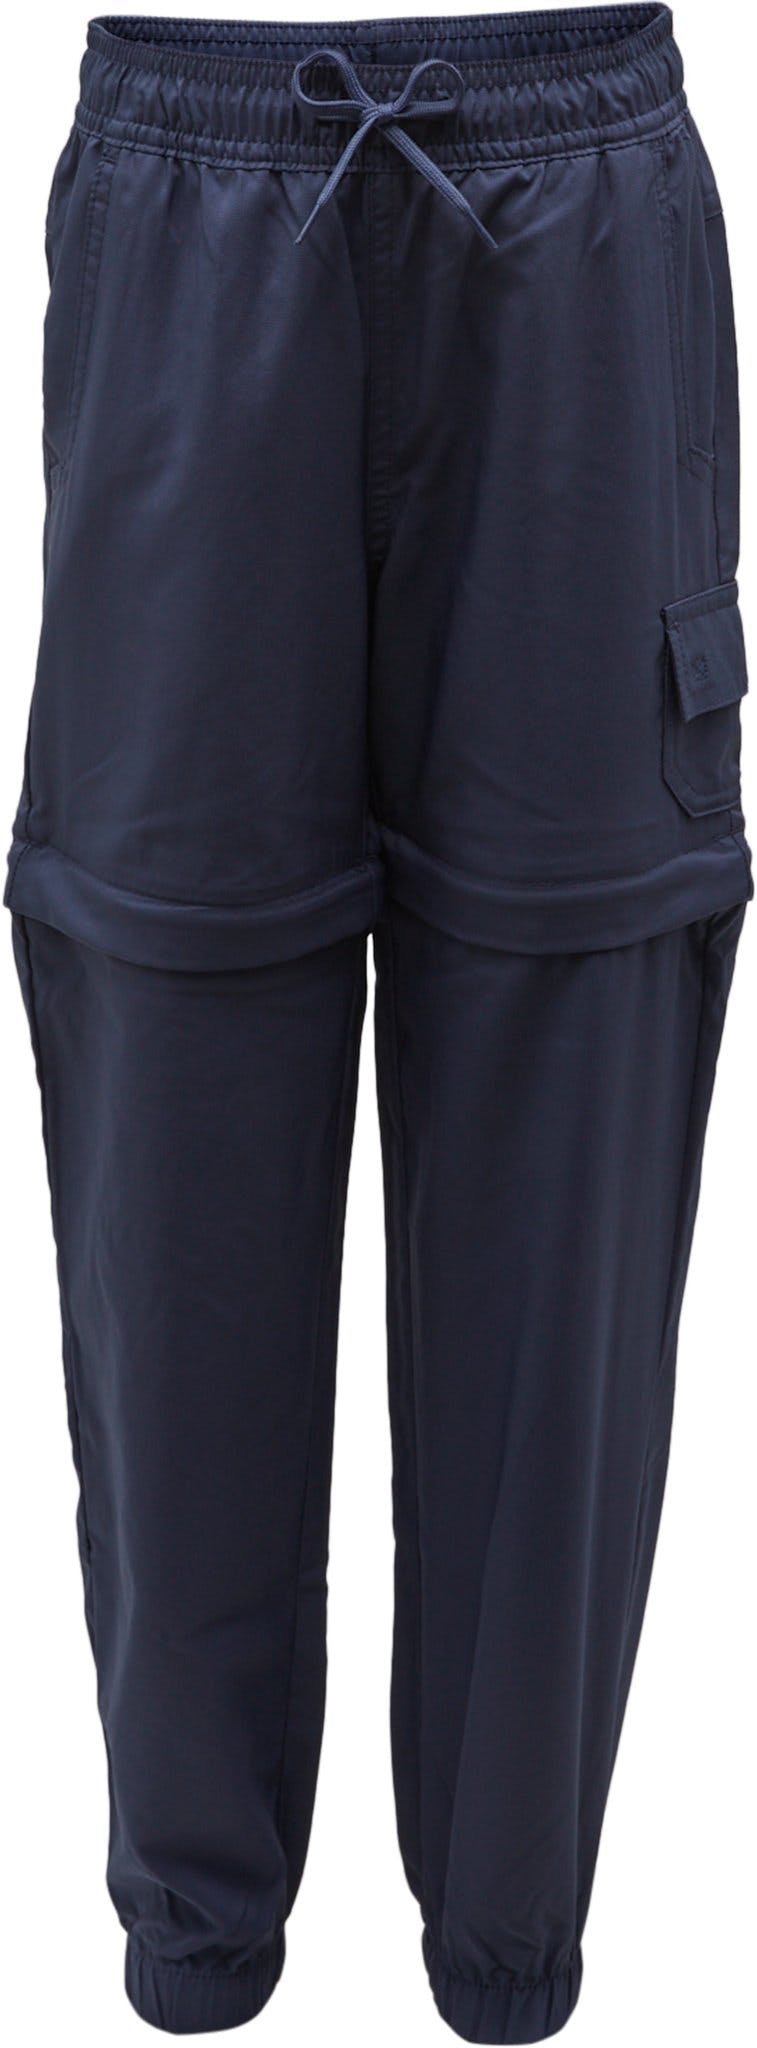 Product image for Silver Ridge Utility Convertible Pant - Youth